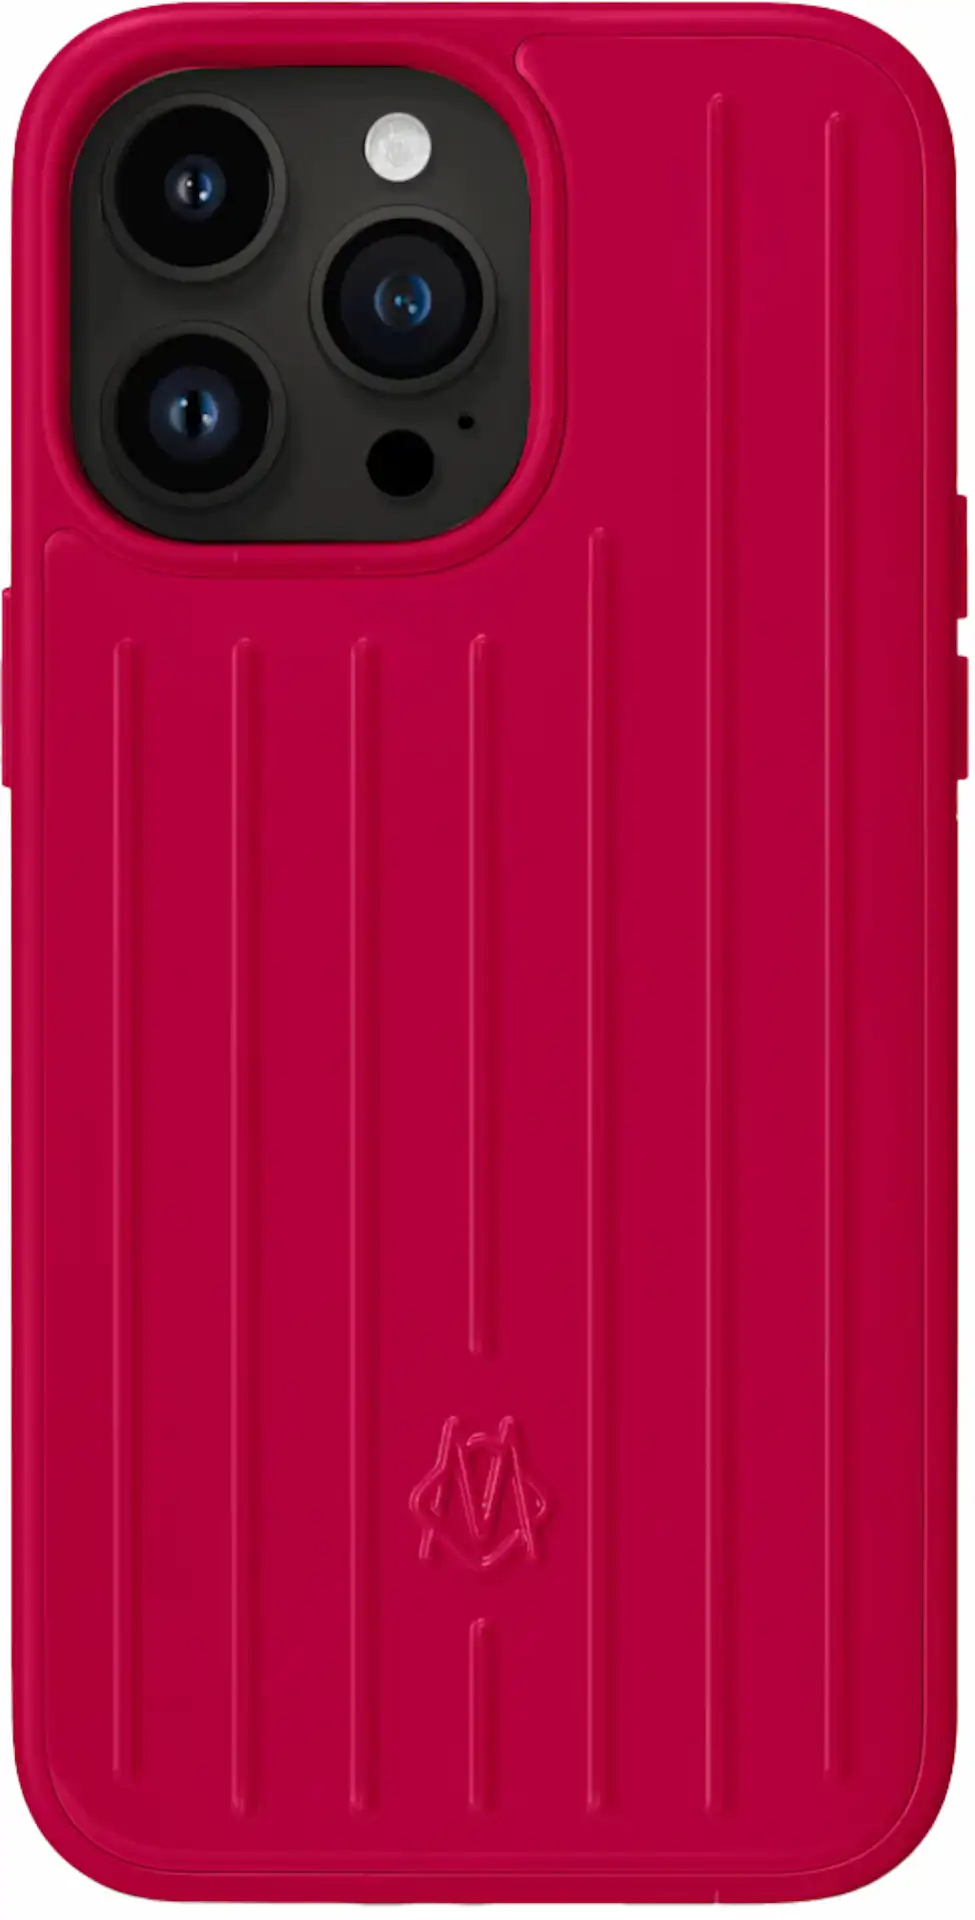 Rimowa iPhone 14 Pro Max Cover Raspberry Pink - SS23 - CN